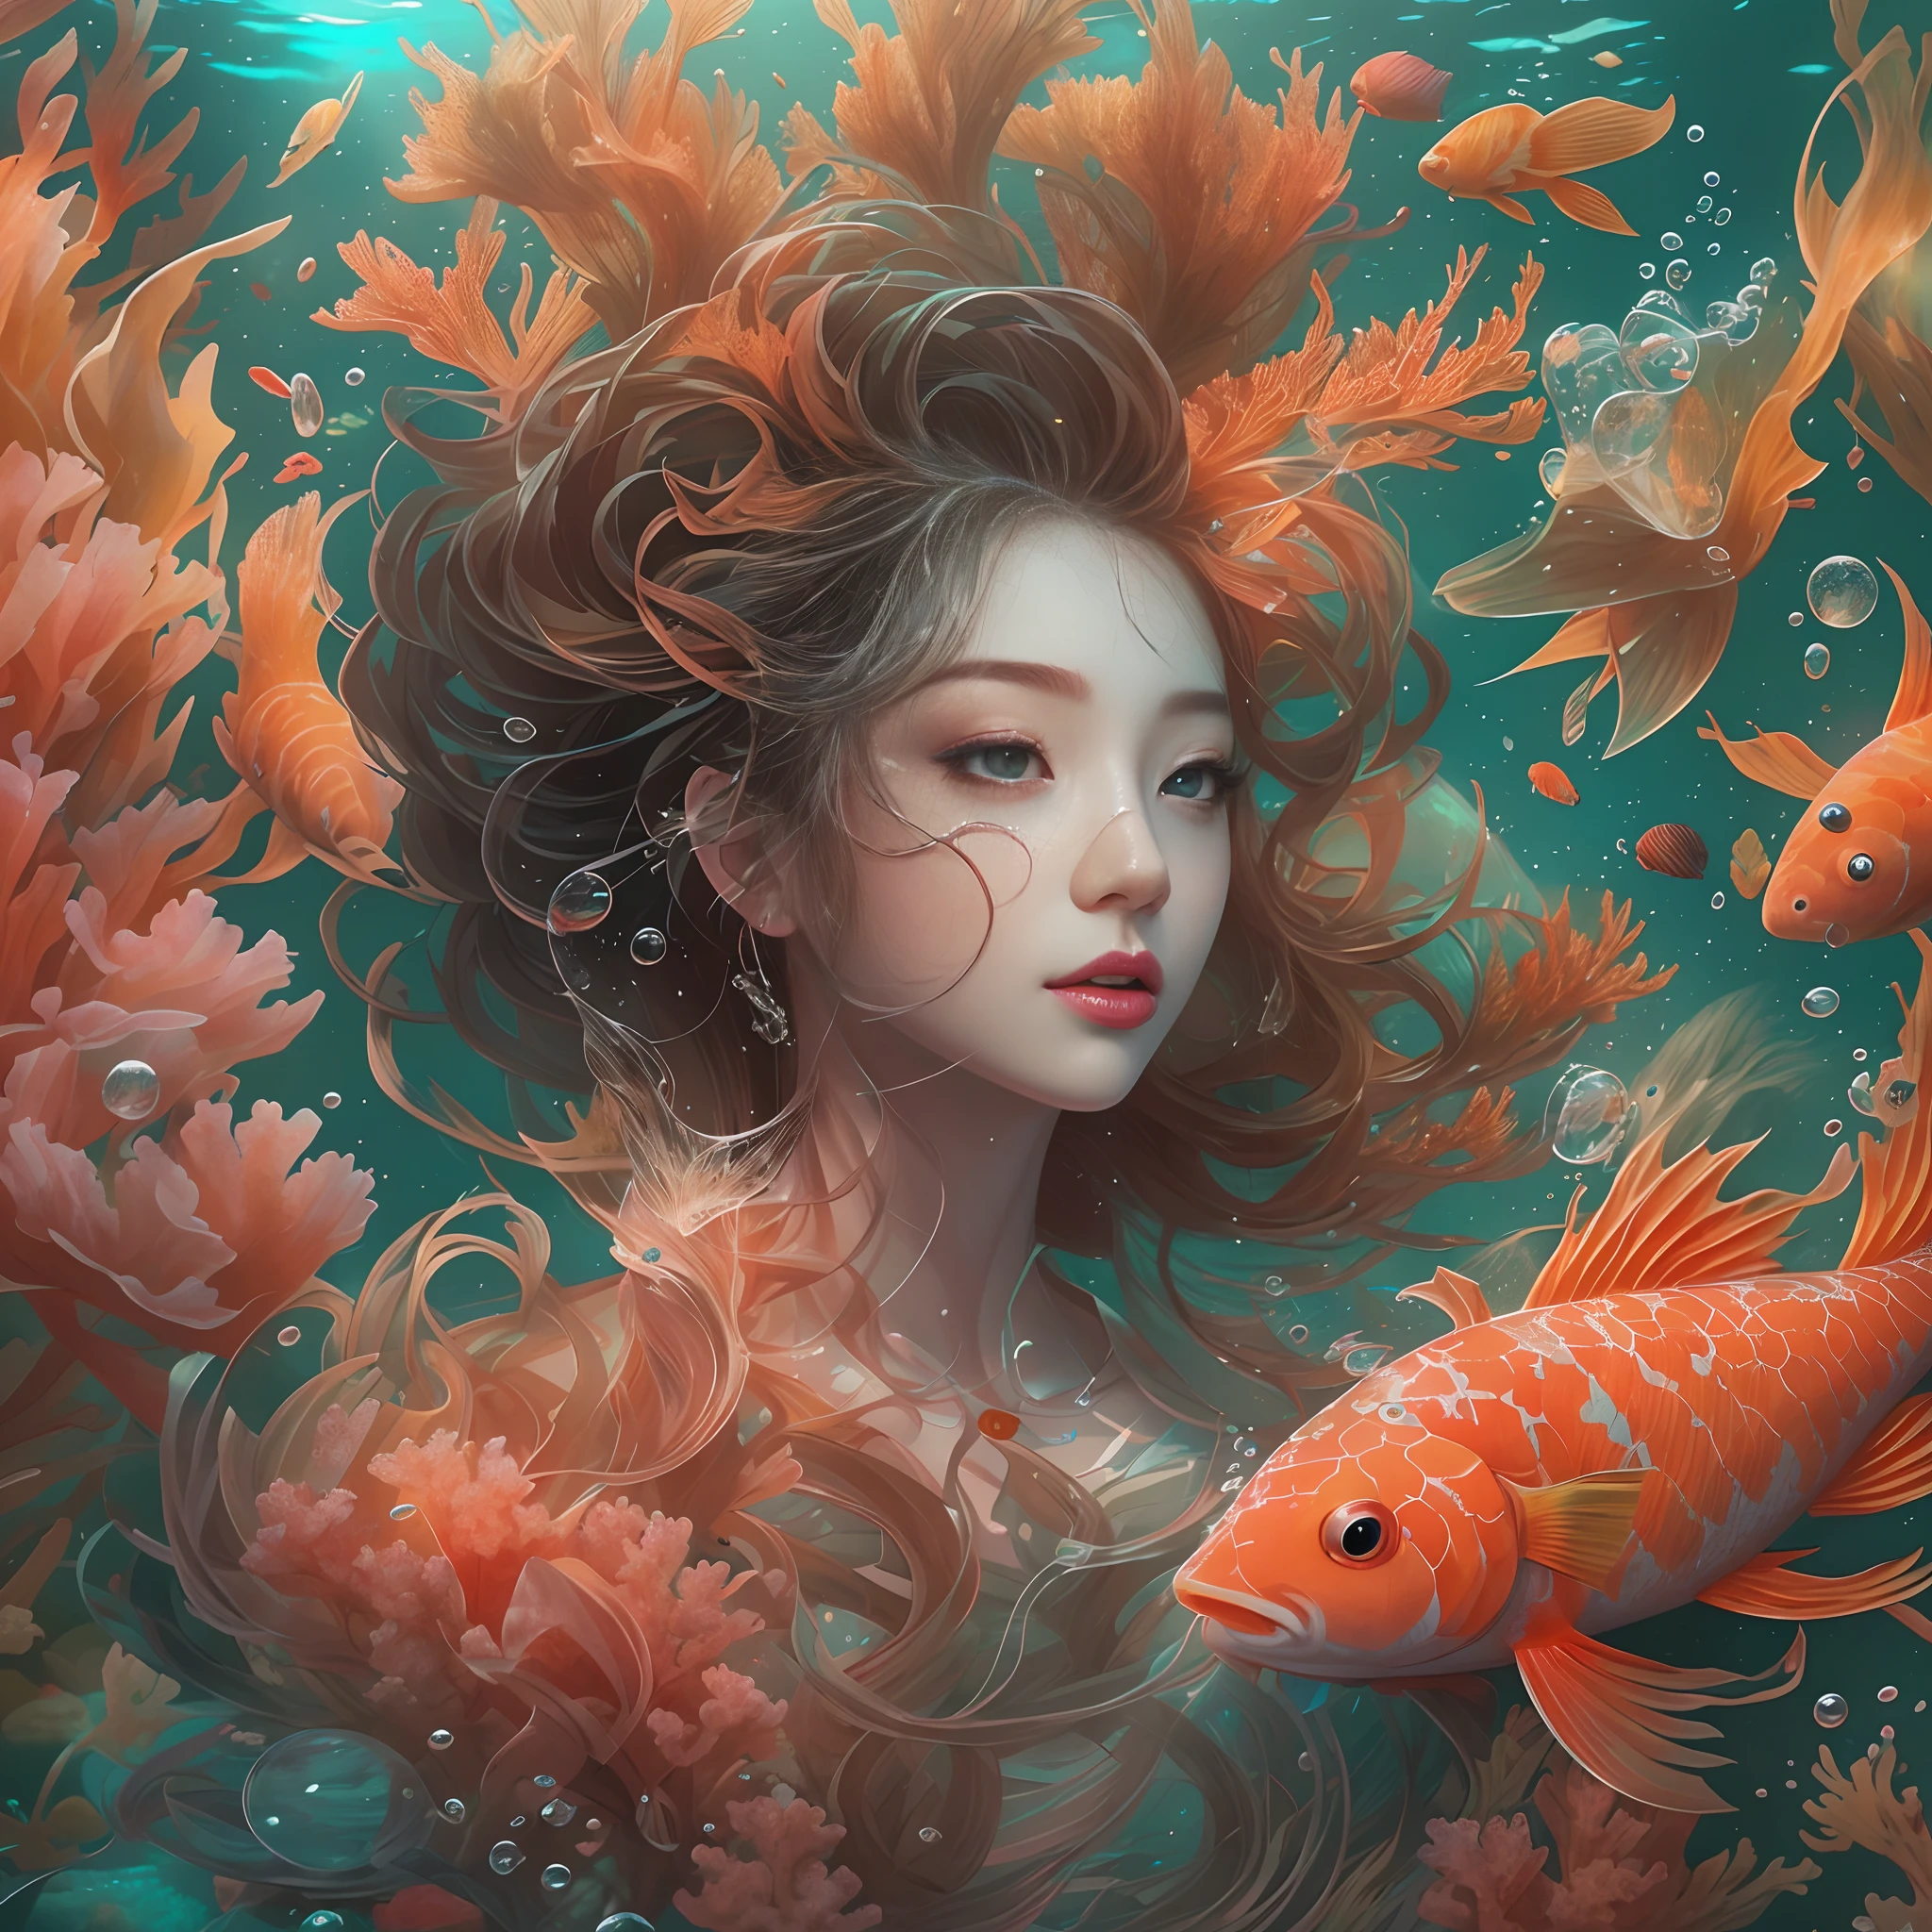 ModelShoot style, (Extremely detailed Cg Unity 8K wallpaper), A chaotic storm of intricate liquid smoke in the head, Stylized abstract portrait of beautiful girl, wetted skin,Koi，Beautiful koi，Flocks of koi,carp，Strange shaped corals，ocean floor，Beautiful coral reef in the background，Rochas,Marine life，colorful coral reef,author：Petros Afshar, ross tran, tom whalen, Peter Mohrbacher, Art germ, Broken glass, ((bubbly underwater scenery)) Radiant light octane rendering is highly detailed, inspired by Yanjun Cheng, Beautiful digital artwork, Guviz-style artwork, 8K highly detailed digital art, Beautiful digital illustration, Cute detailed digital art, stunning digital illustration, A beautiful artwork illustration, Exquisite digital illustration,8K detailed digital art,